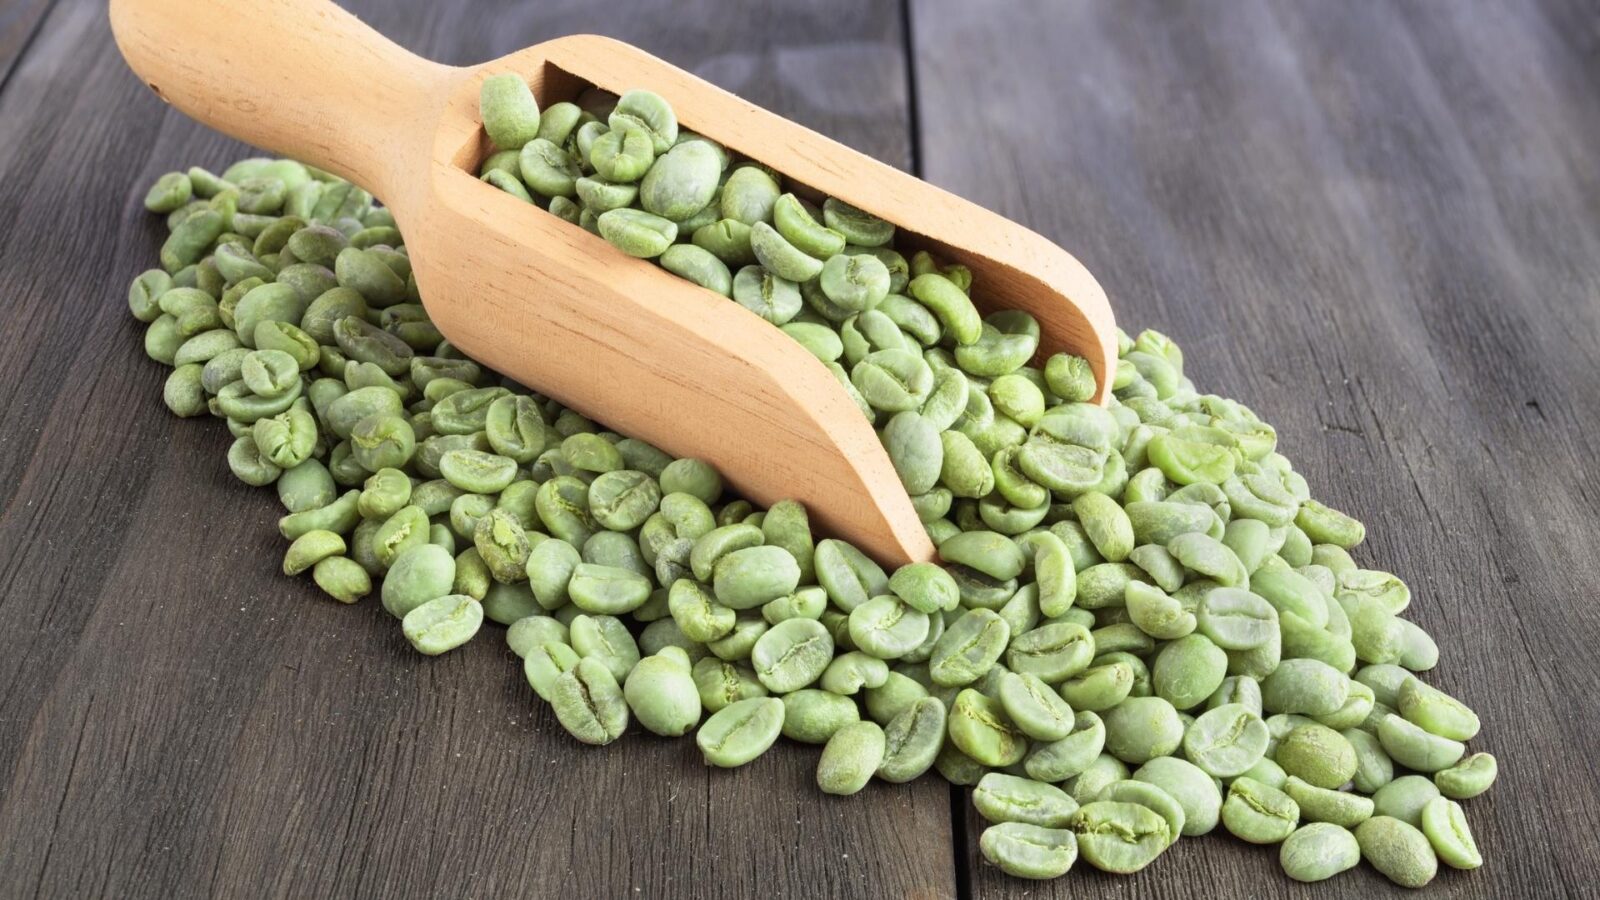 Expected shelf life of green coffee beans is 6 months to 1 year